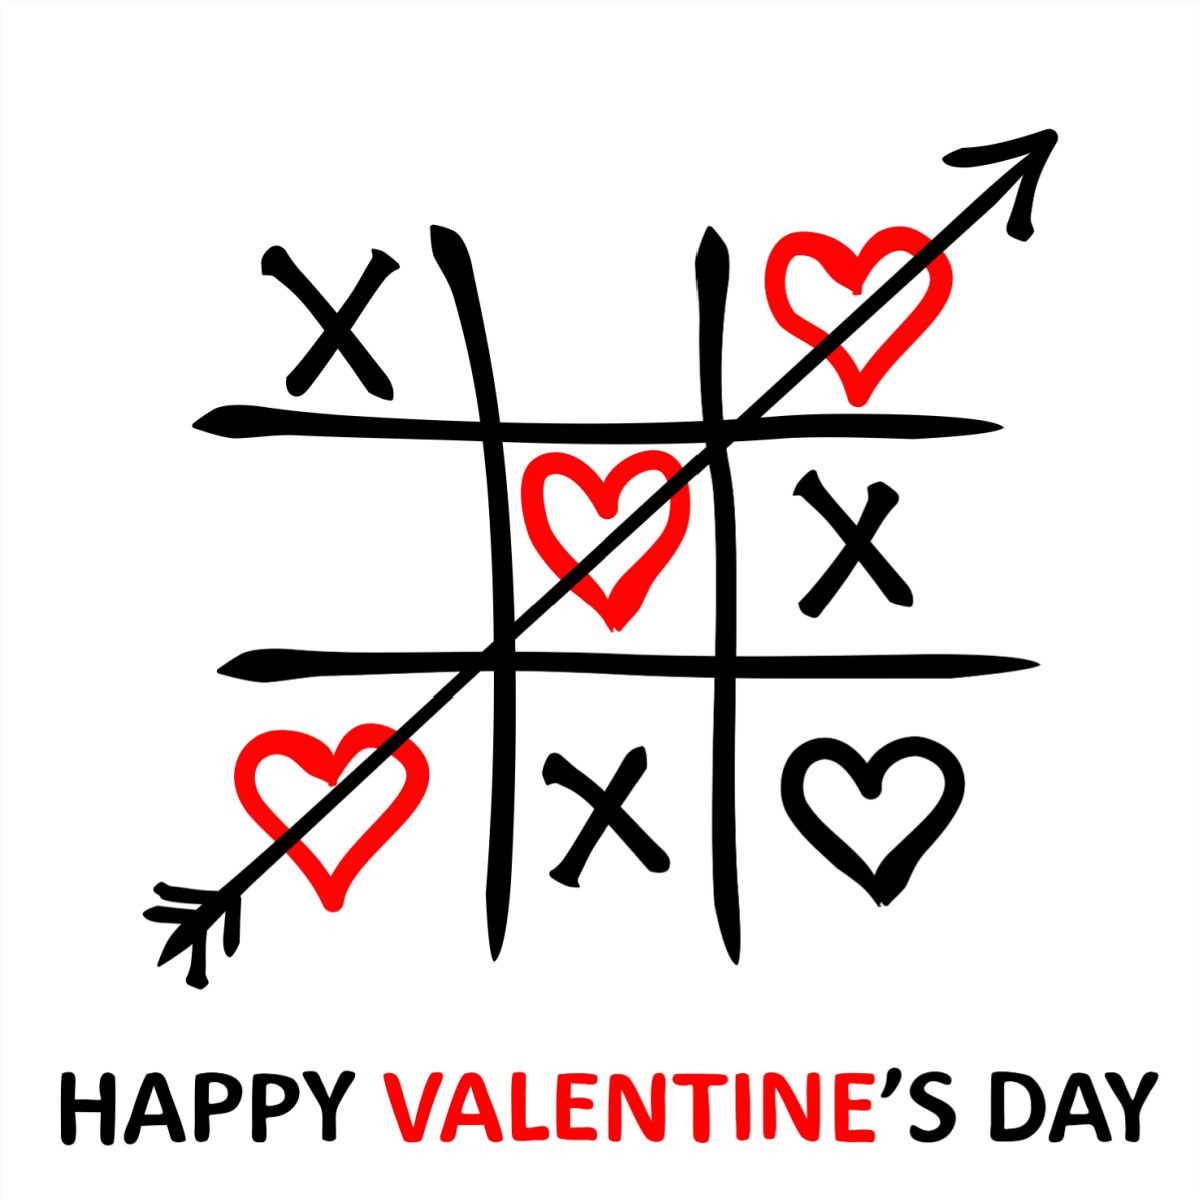 A Valentine's Day puzzle featuring a tic tac toe game and the words "Happy Valentine's Day" at the bottom